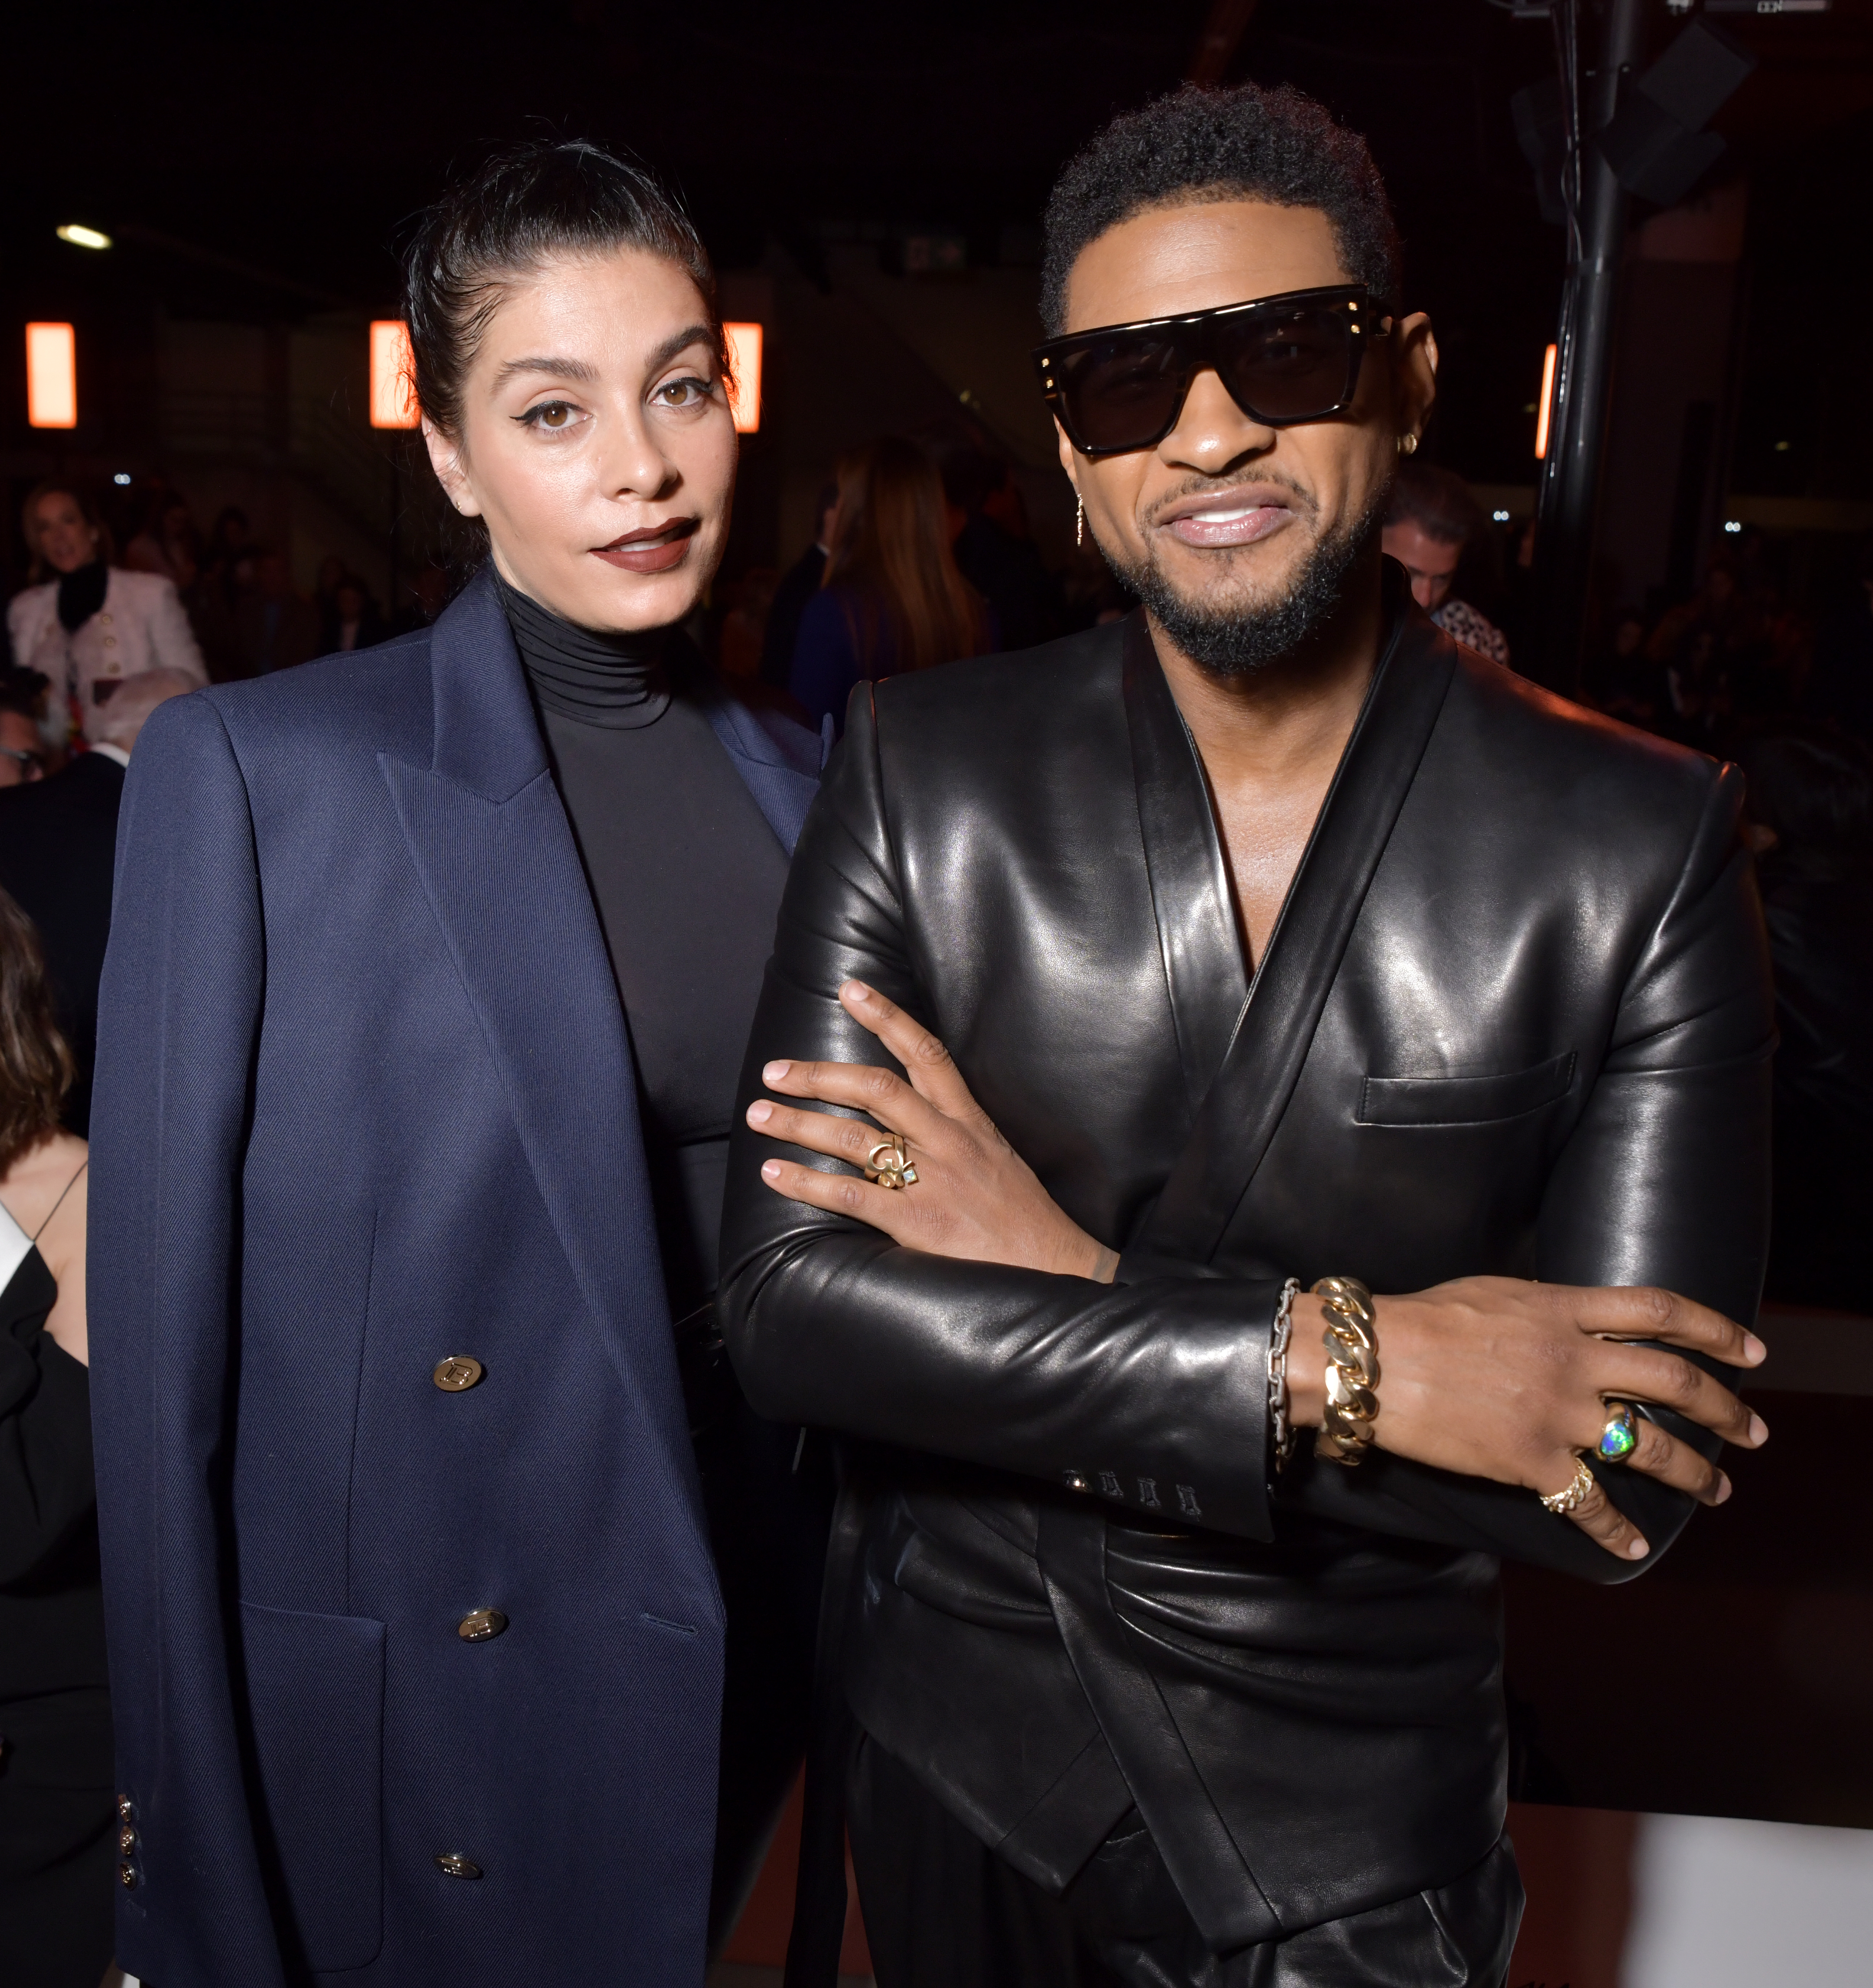 Jenn Goicoechea and Usher during Paris Fashion Week in Paris, France on February 28, 2020 | Source: Getty Images